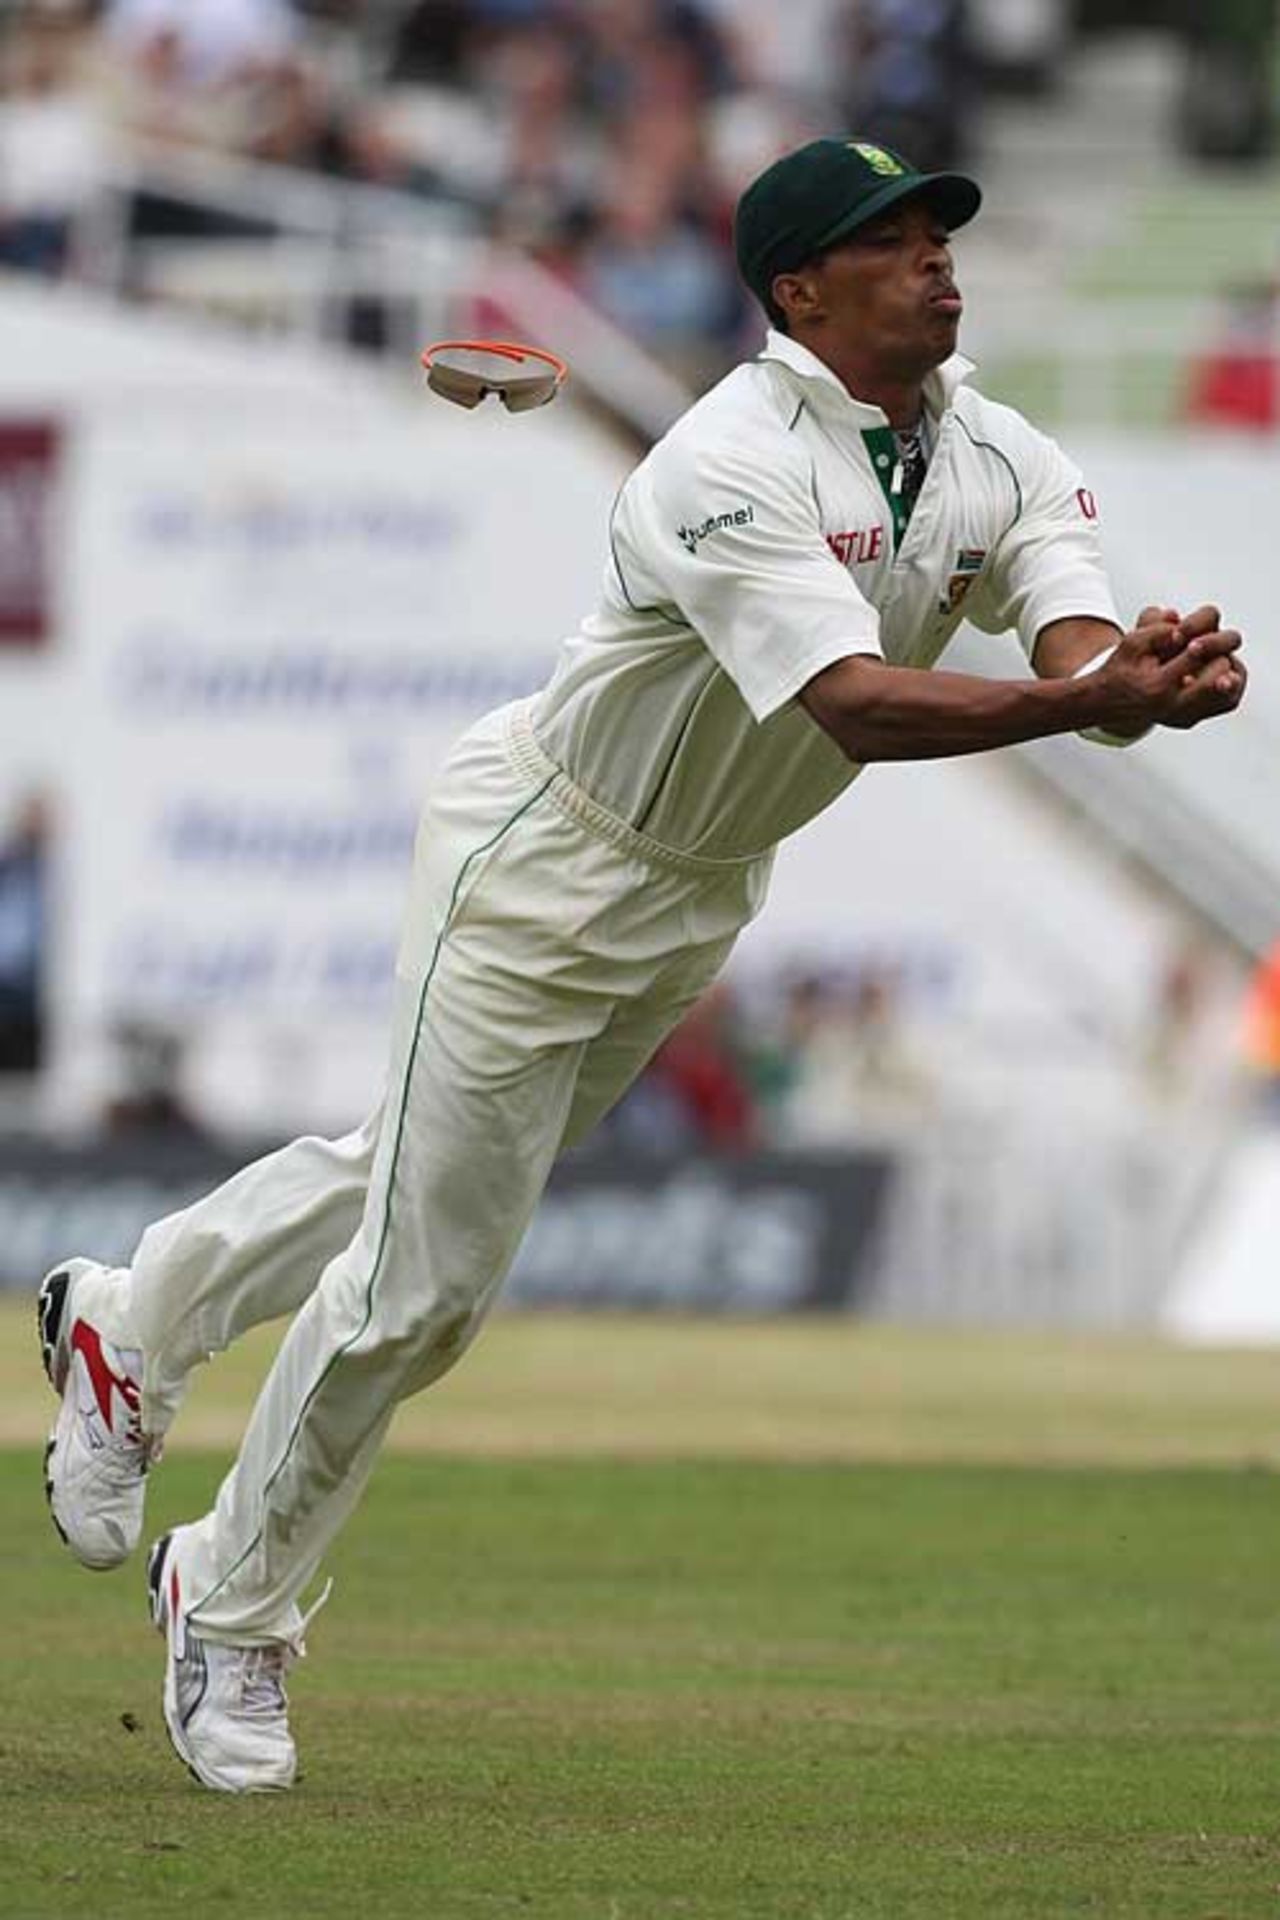 Makhaya Nitni can't reach his second tough catch of the innings, England v South Africa, 4th Test, The Oval, August 8, 2008